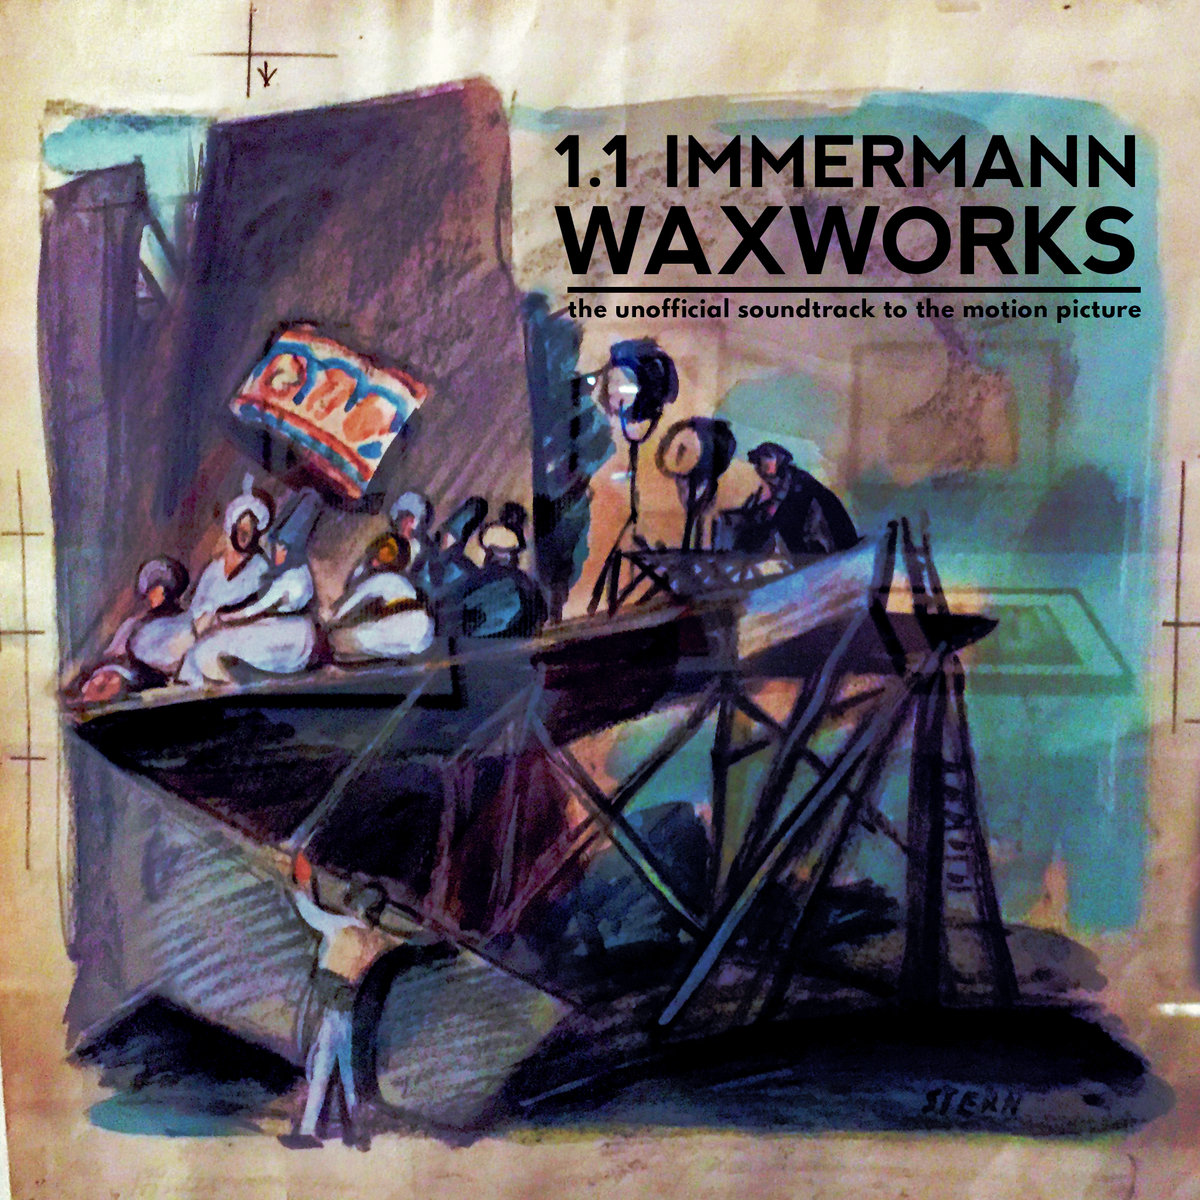 1.1 Immermann - "Waxworks" [Recorded, Mixed & Mastered (JP)]